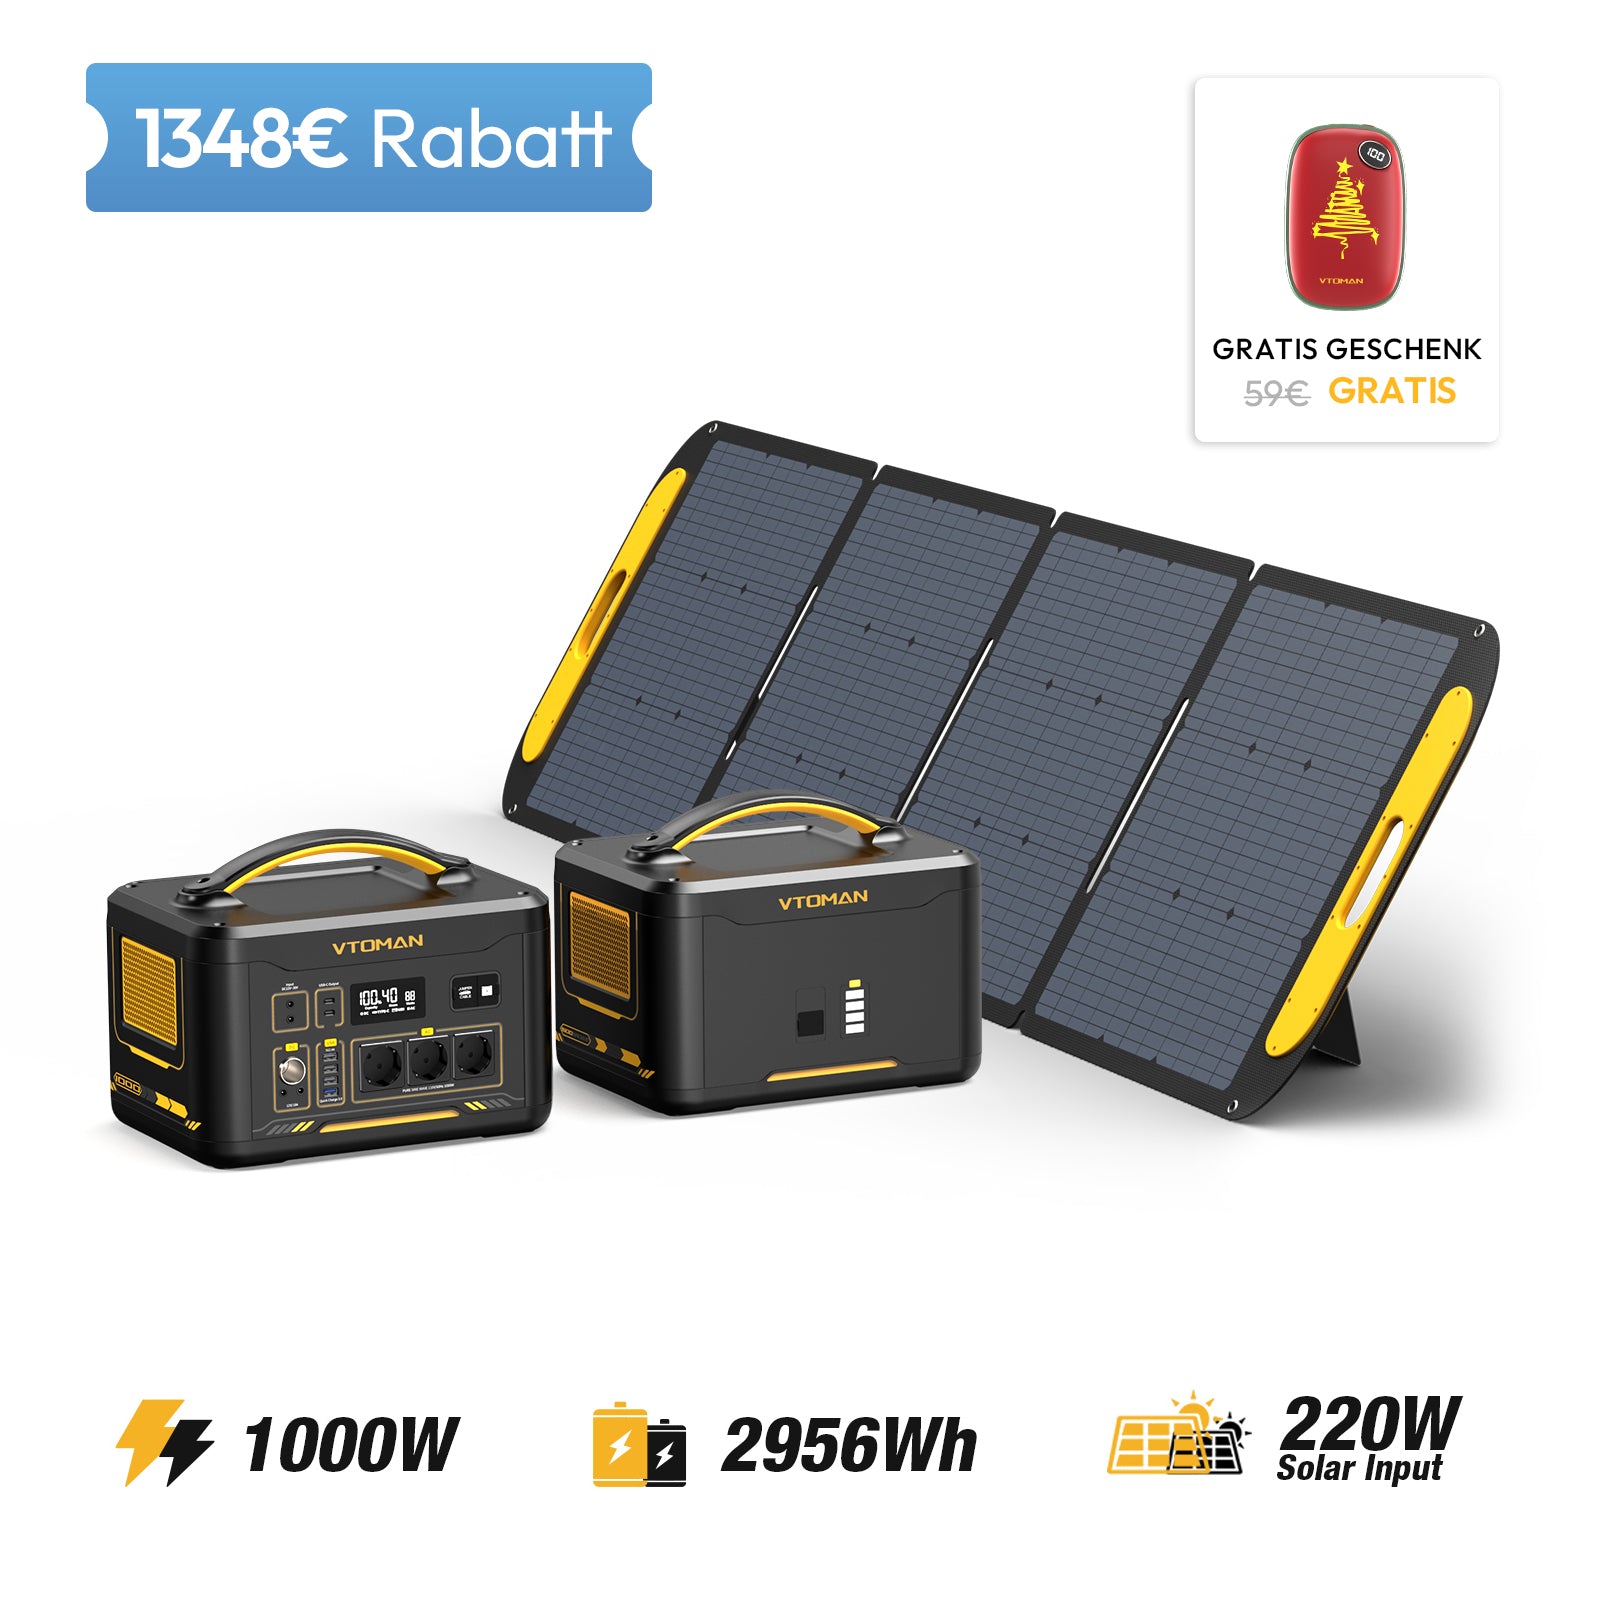 Jump 1000W/ 2956Wh 220W Solargenerator